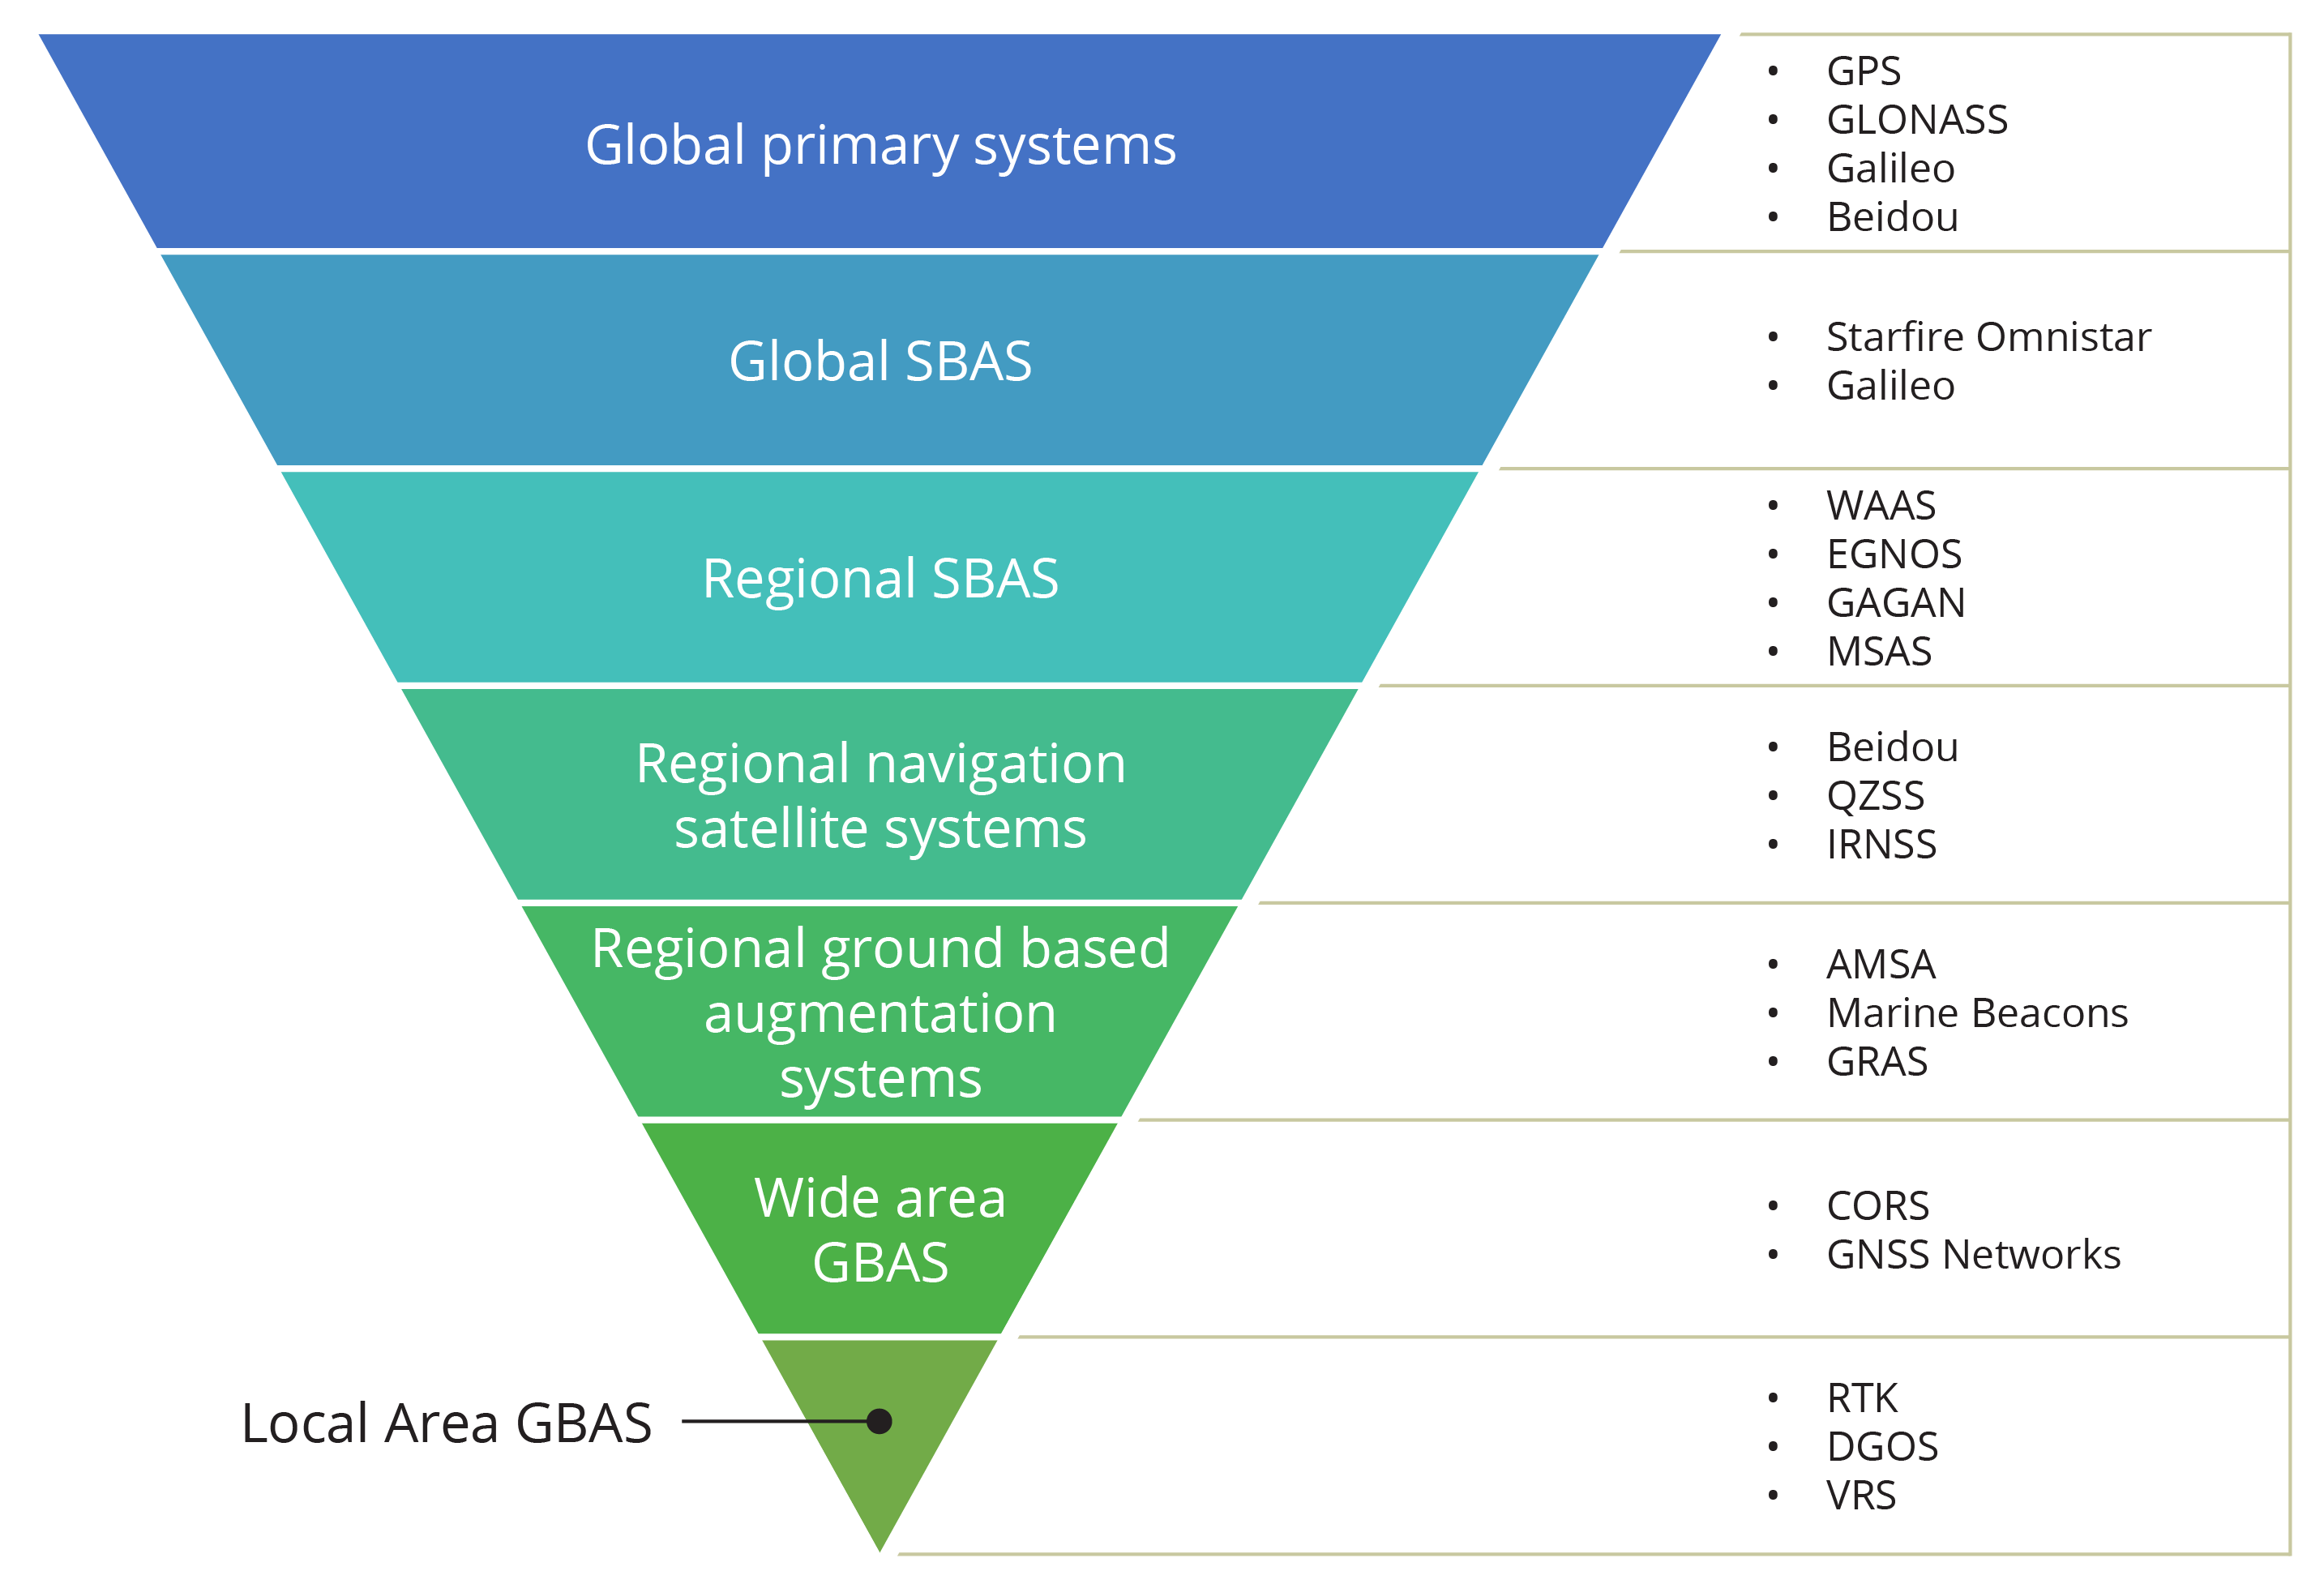 Triangle hierarchy of satellite systems. At the top is Global Primary Systems, then Global SBAS, Regional SBAS, Regional Navigation Satellite Systems, Regional Ground-based Augmentation Systems, Wide Area GBAS, Local Area GBAS